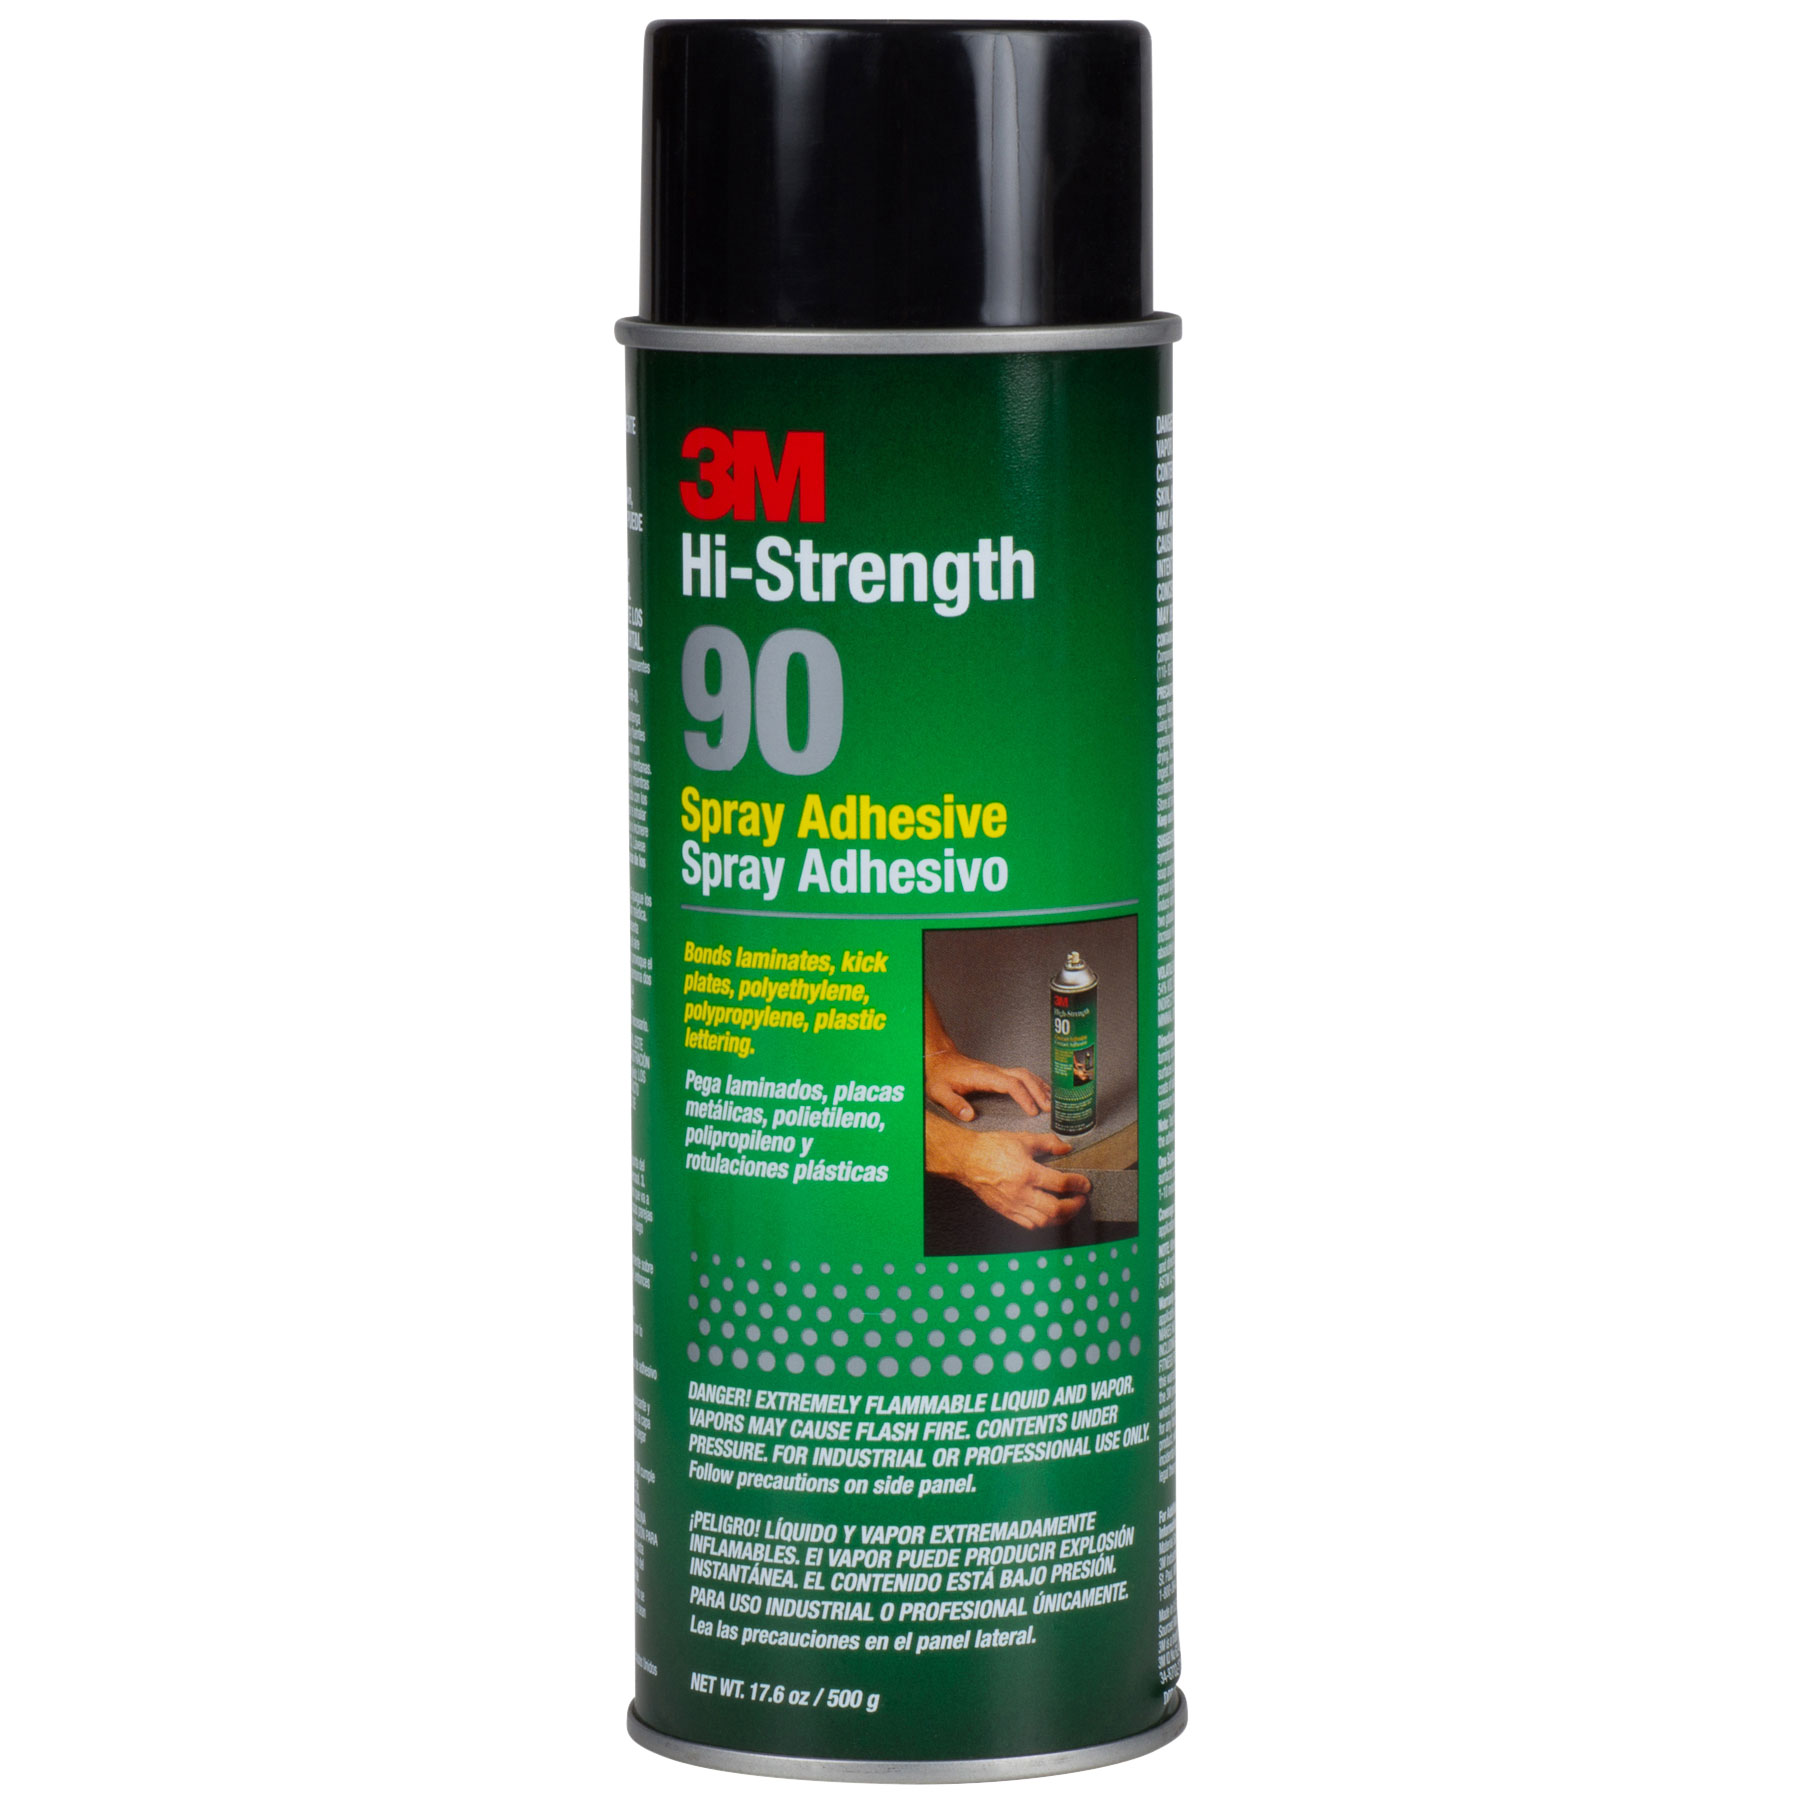 Powerful oh 99 spray adhesive For Strength 